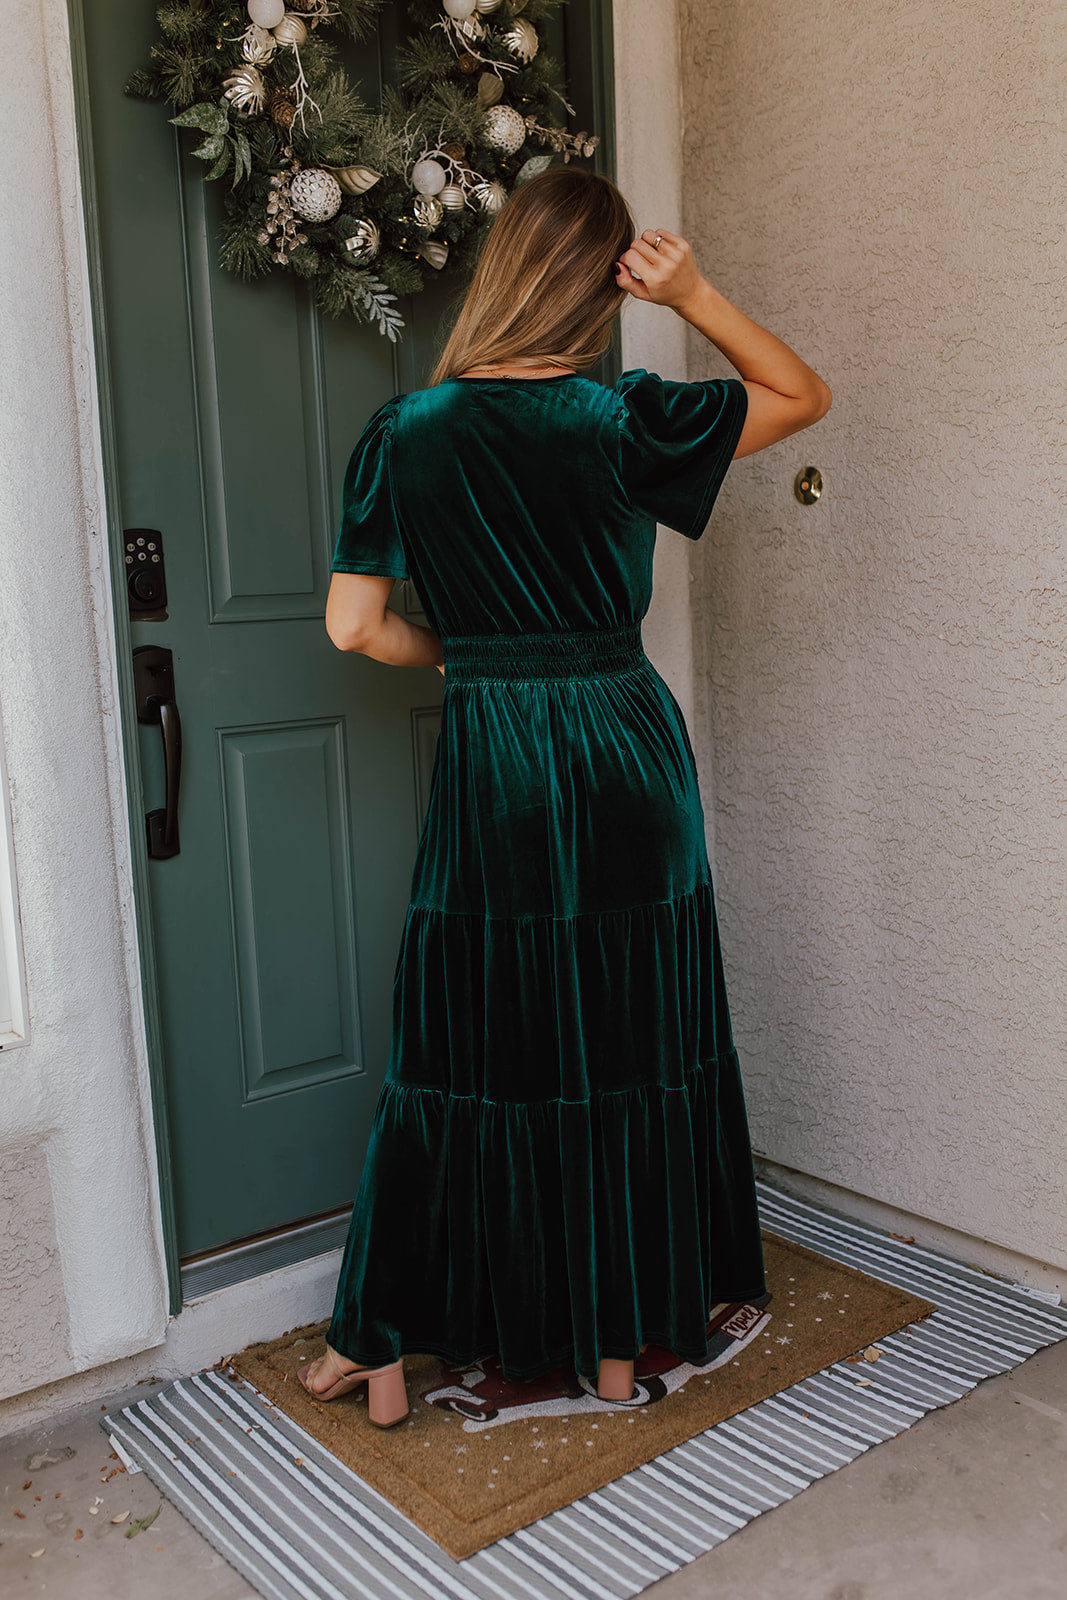 THE TIARA VELVET TIERED DRESS IN FOREST